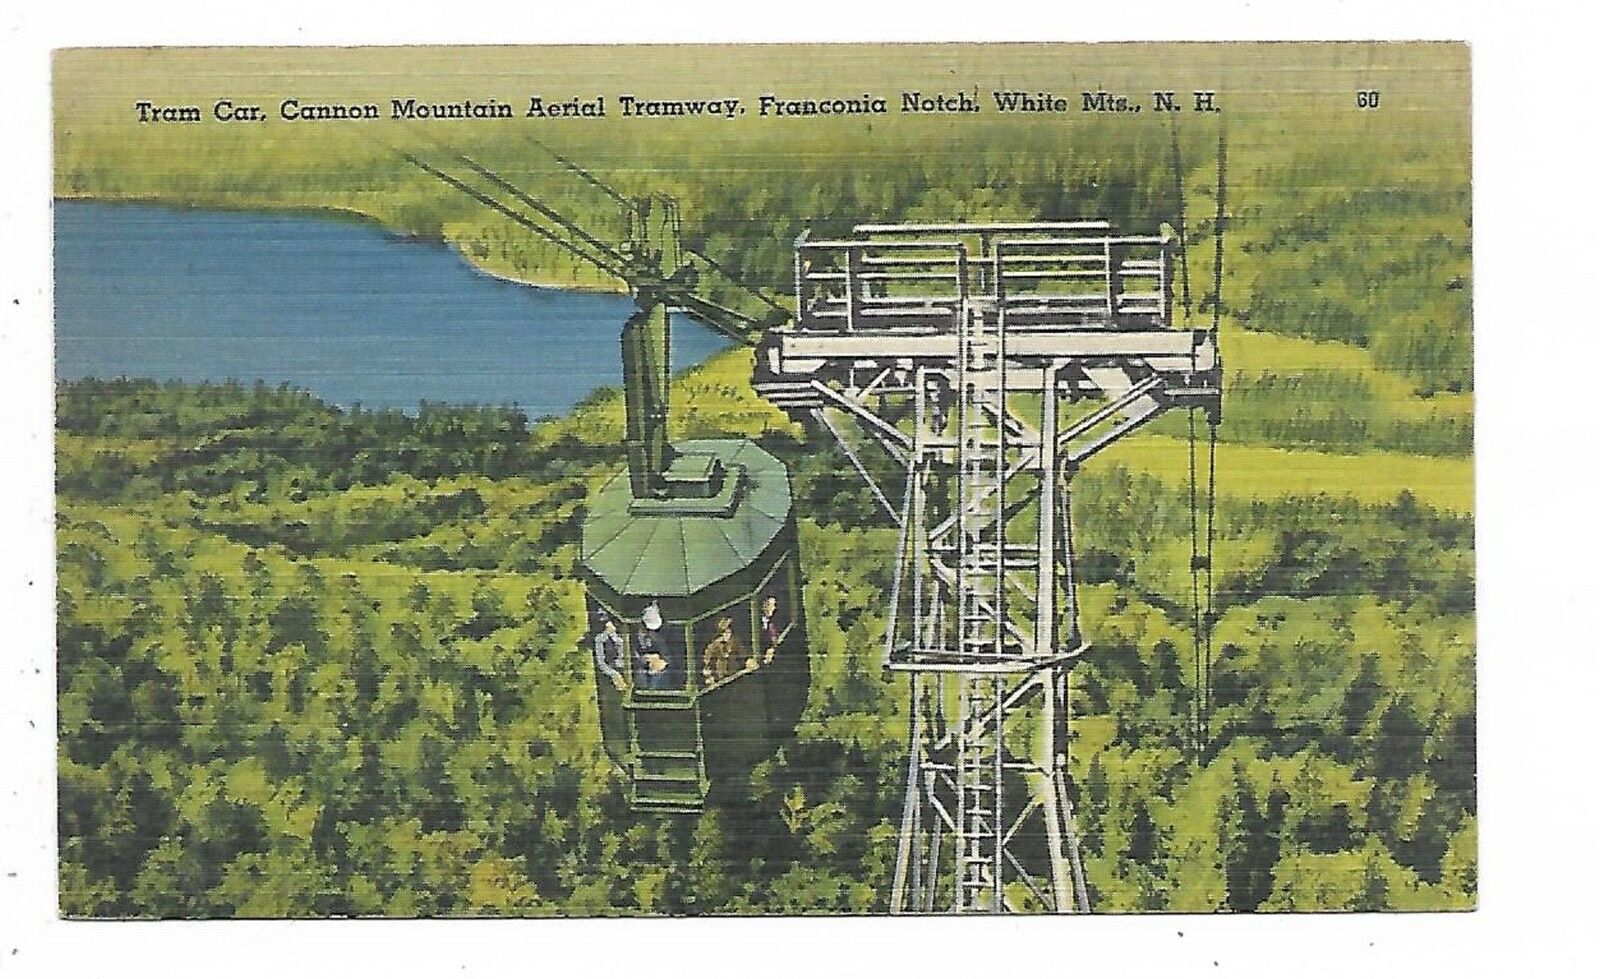 White Mts. NH Postcard Trans Car Cannon Mountain Aerial Tramway Franconia Notch